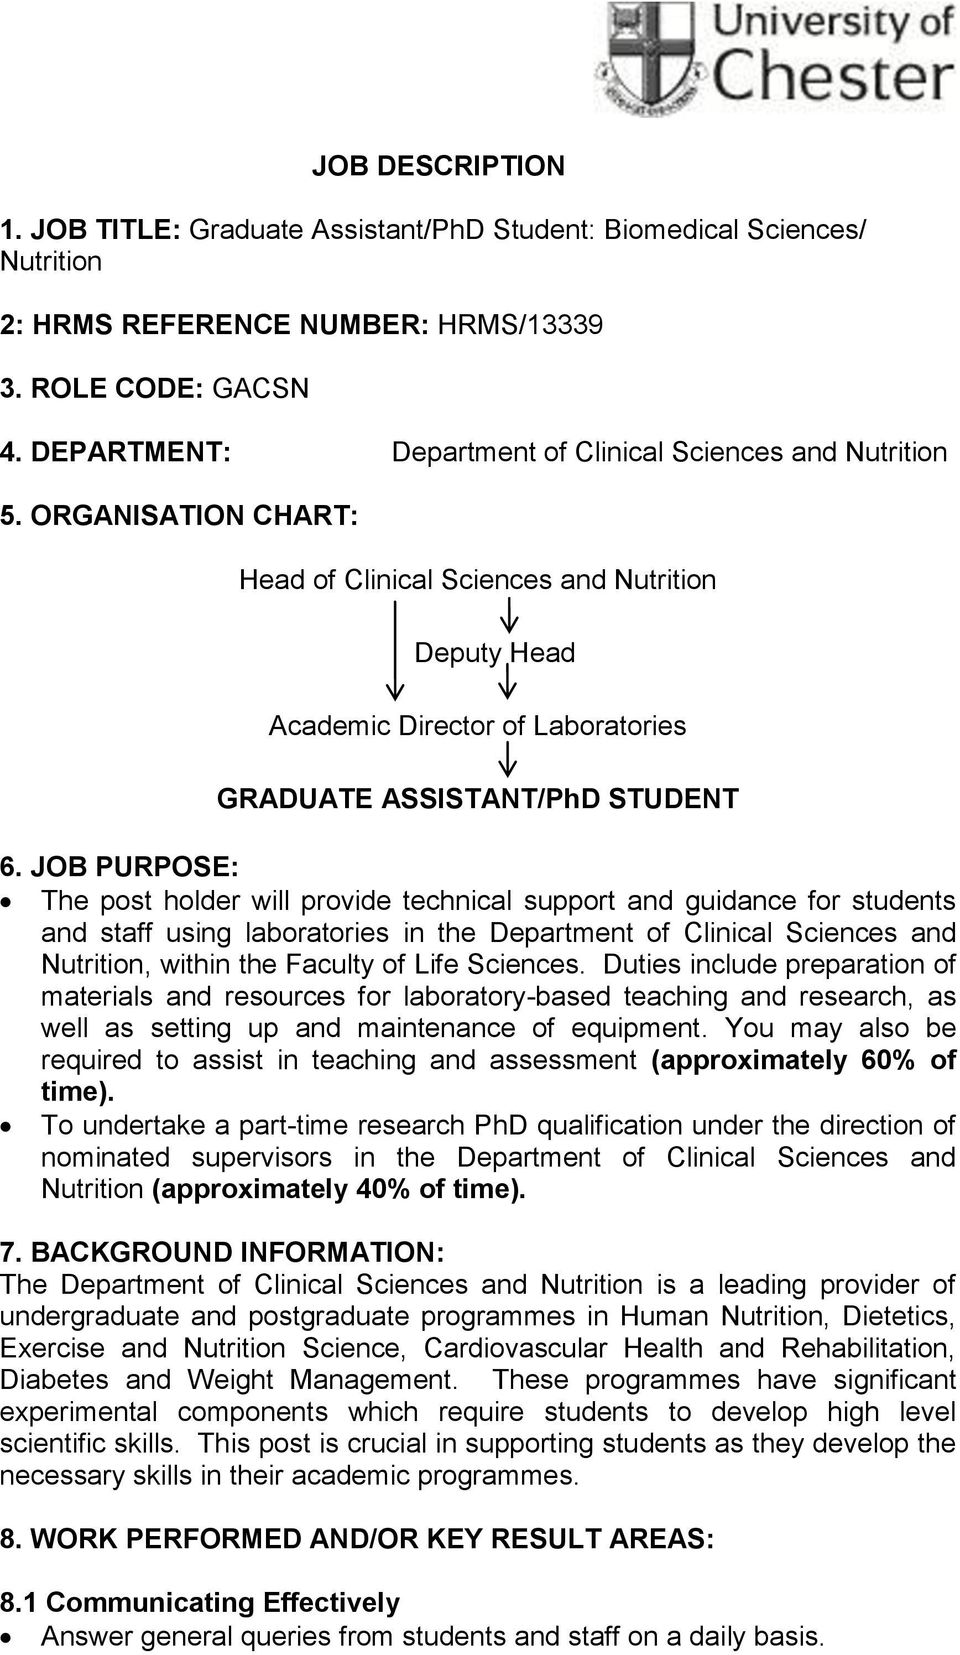 JOB PURPOSE: The post holder will provide technical support and guidance for students and staff using laboratories in the Department of Clinical Sciences and Nutrition, within the Faculty of Life